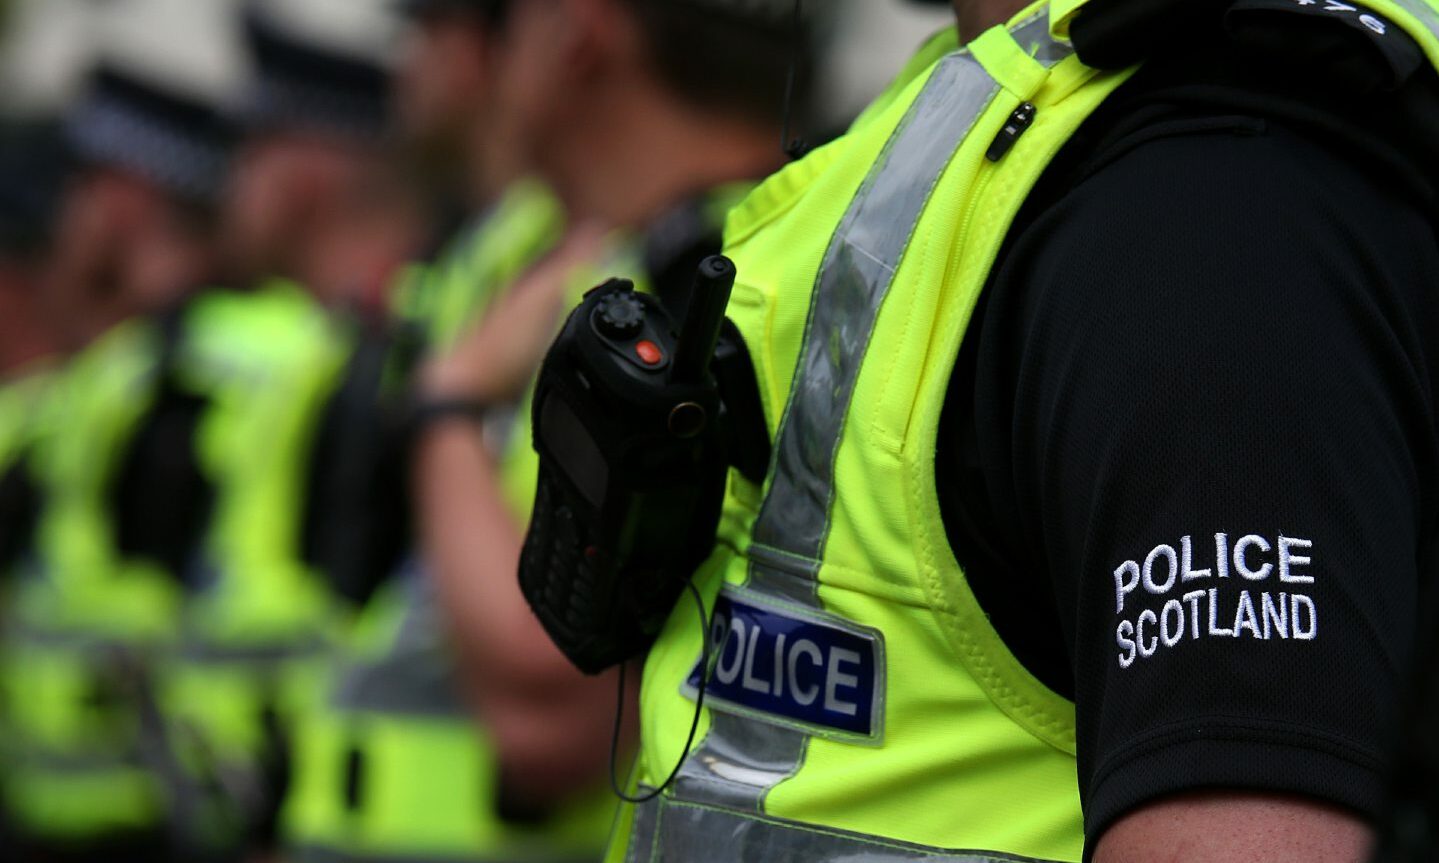 North-east police numbers are the healthiest they have been for some time, according to Ch Supt George Macdonald